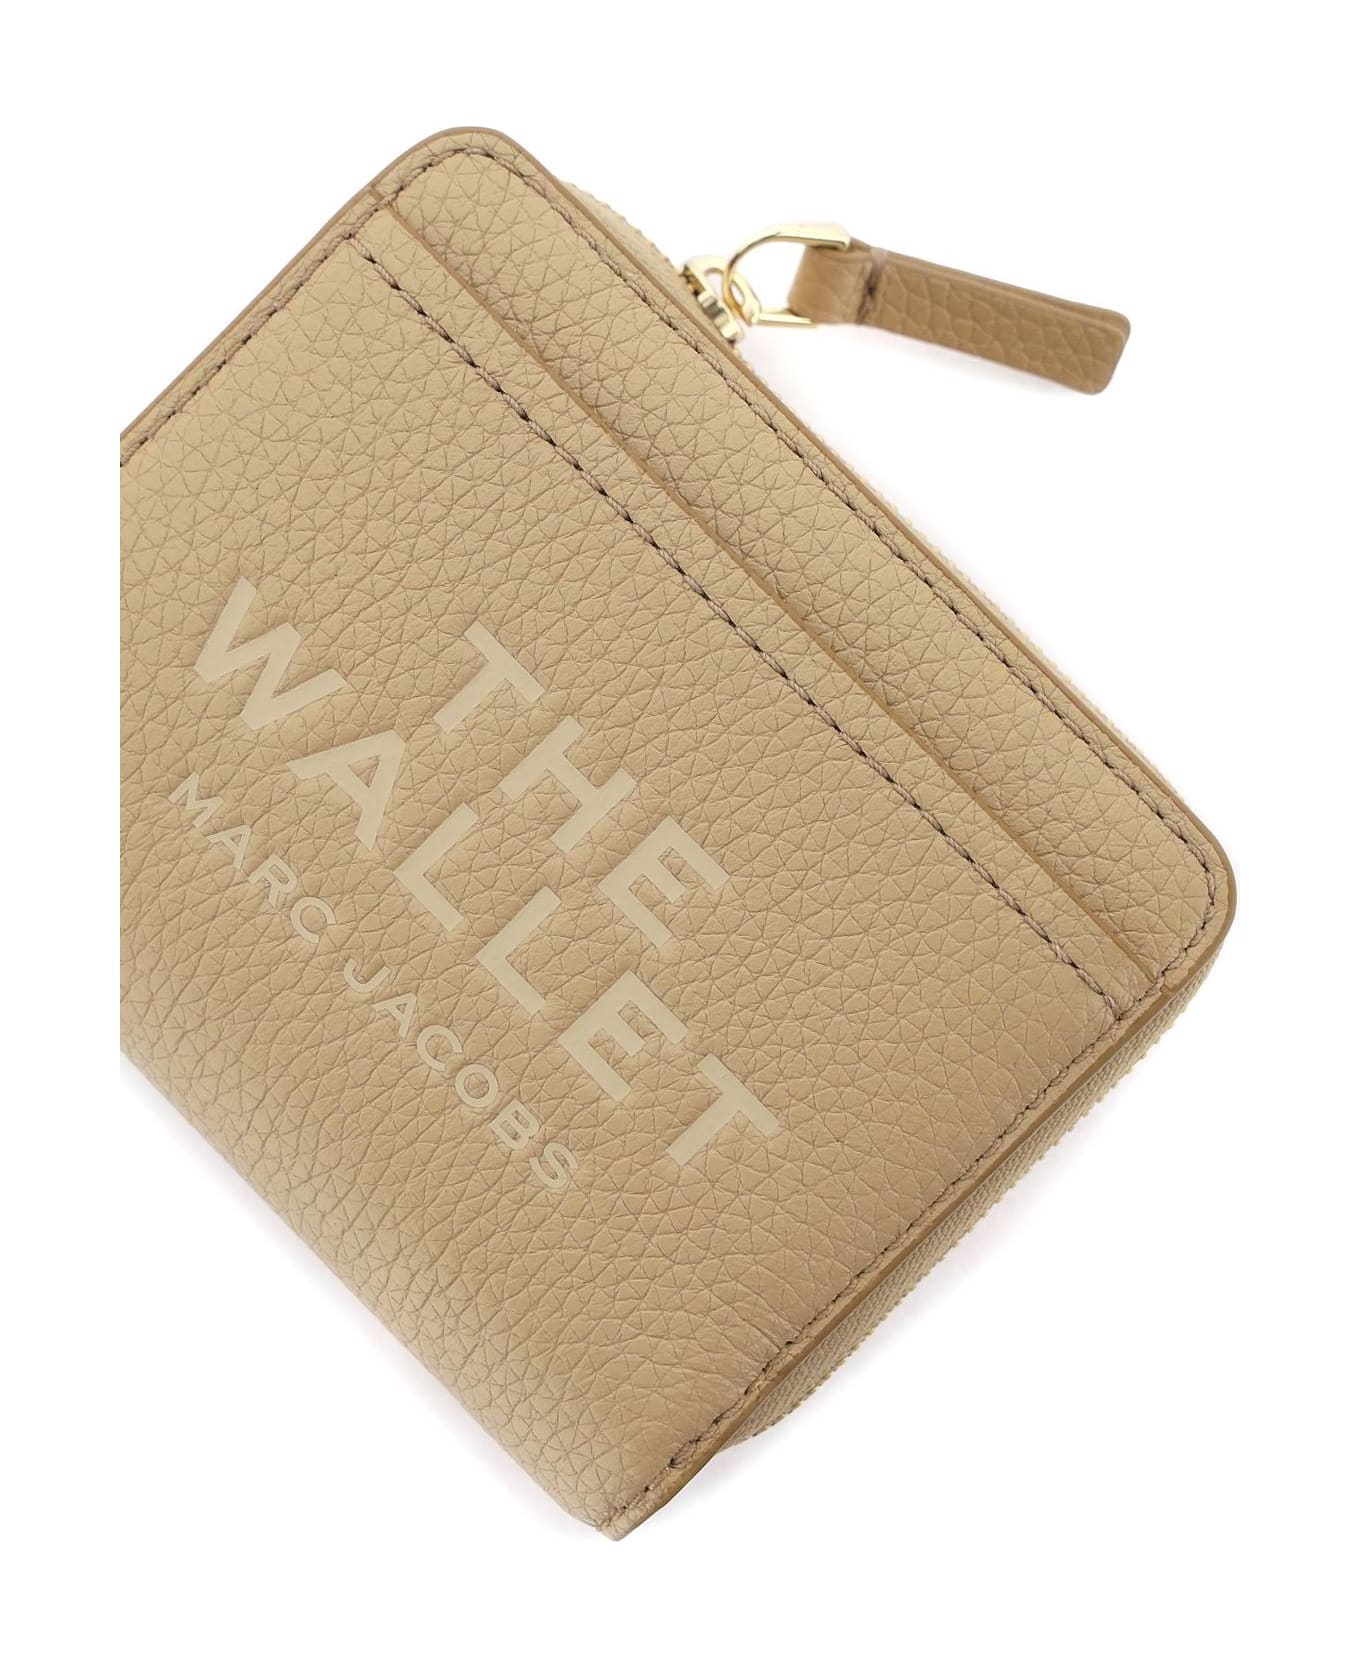 Marc Jacobs The Leather Mini Compact Wallet - CAMEL (Beige)